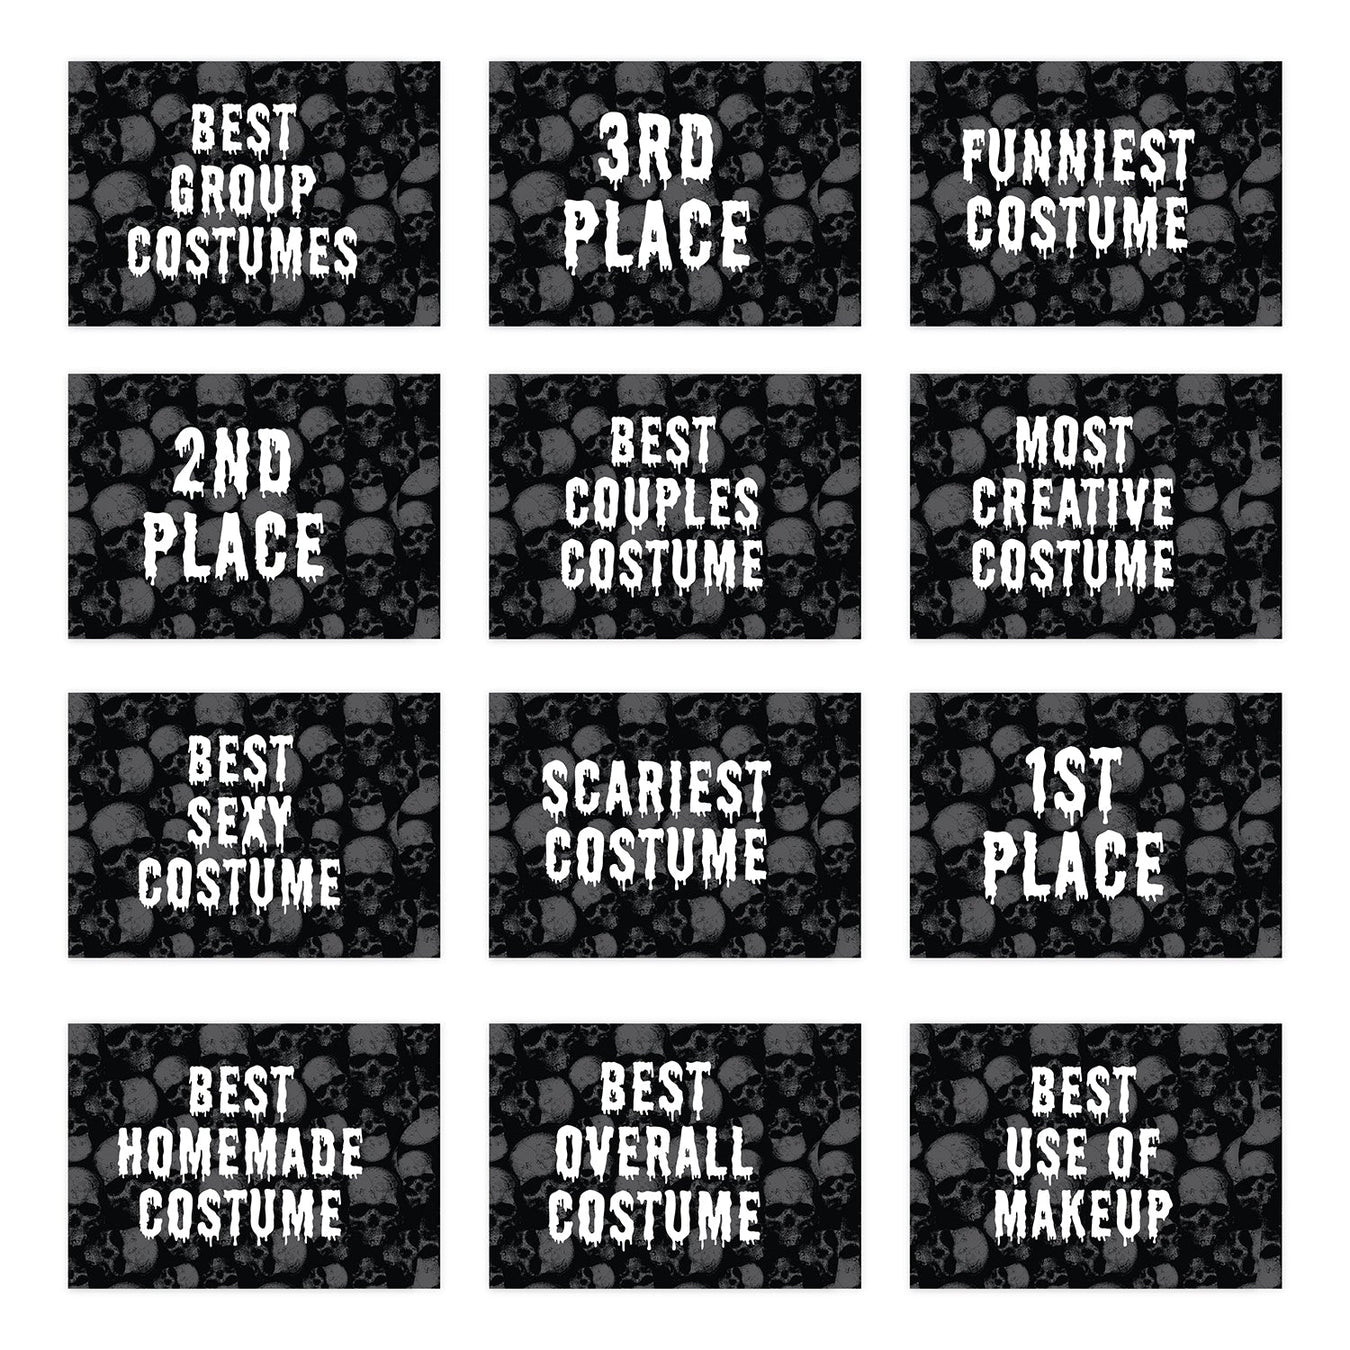 Halloween Costume Contest Gift Card Sleeves